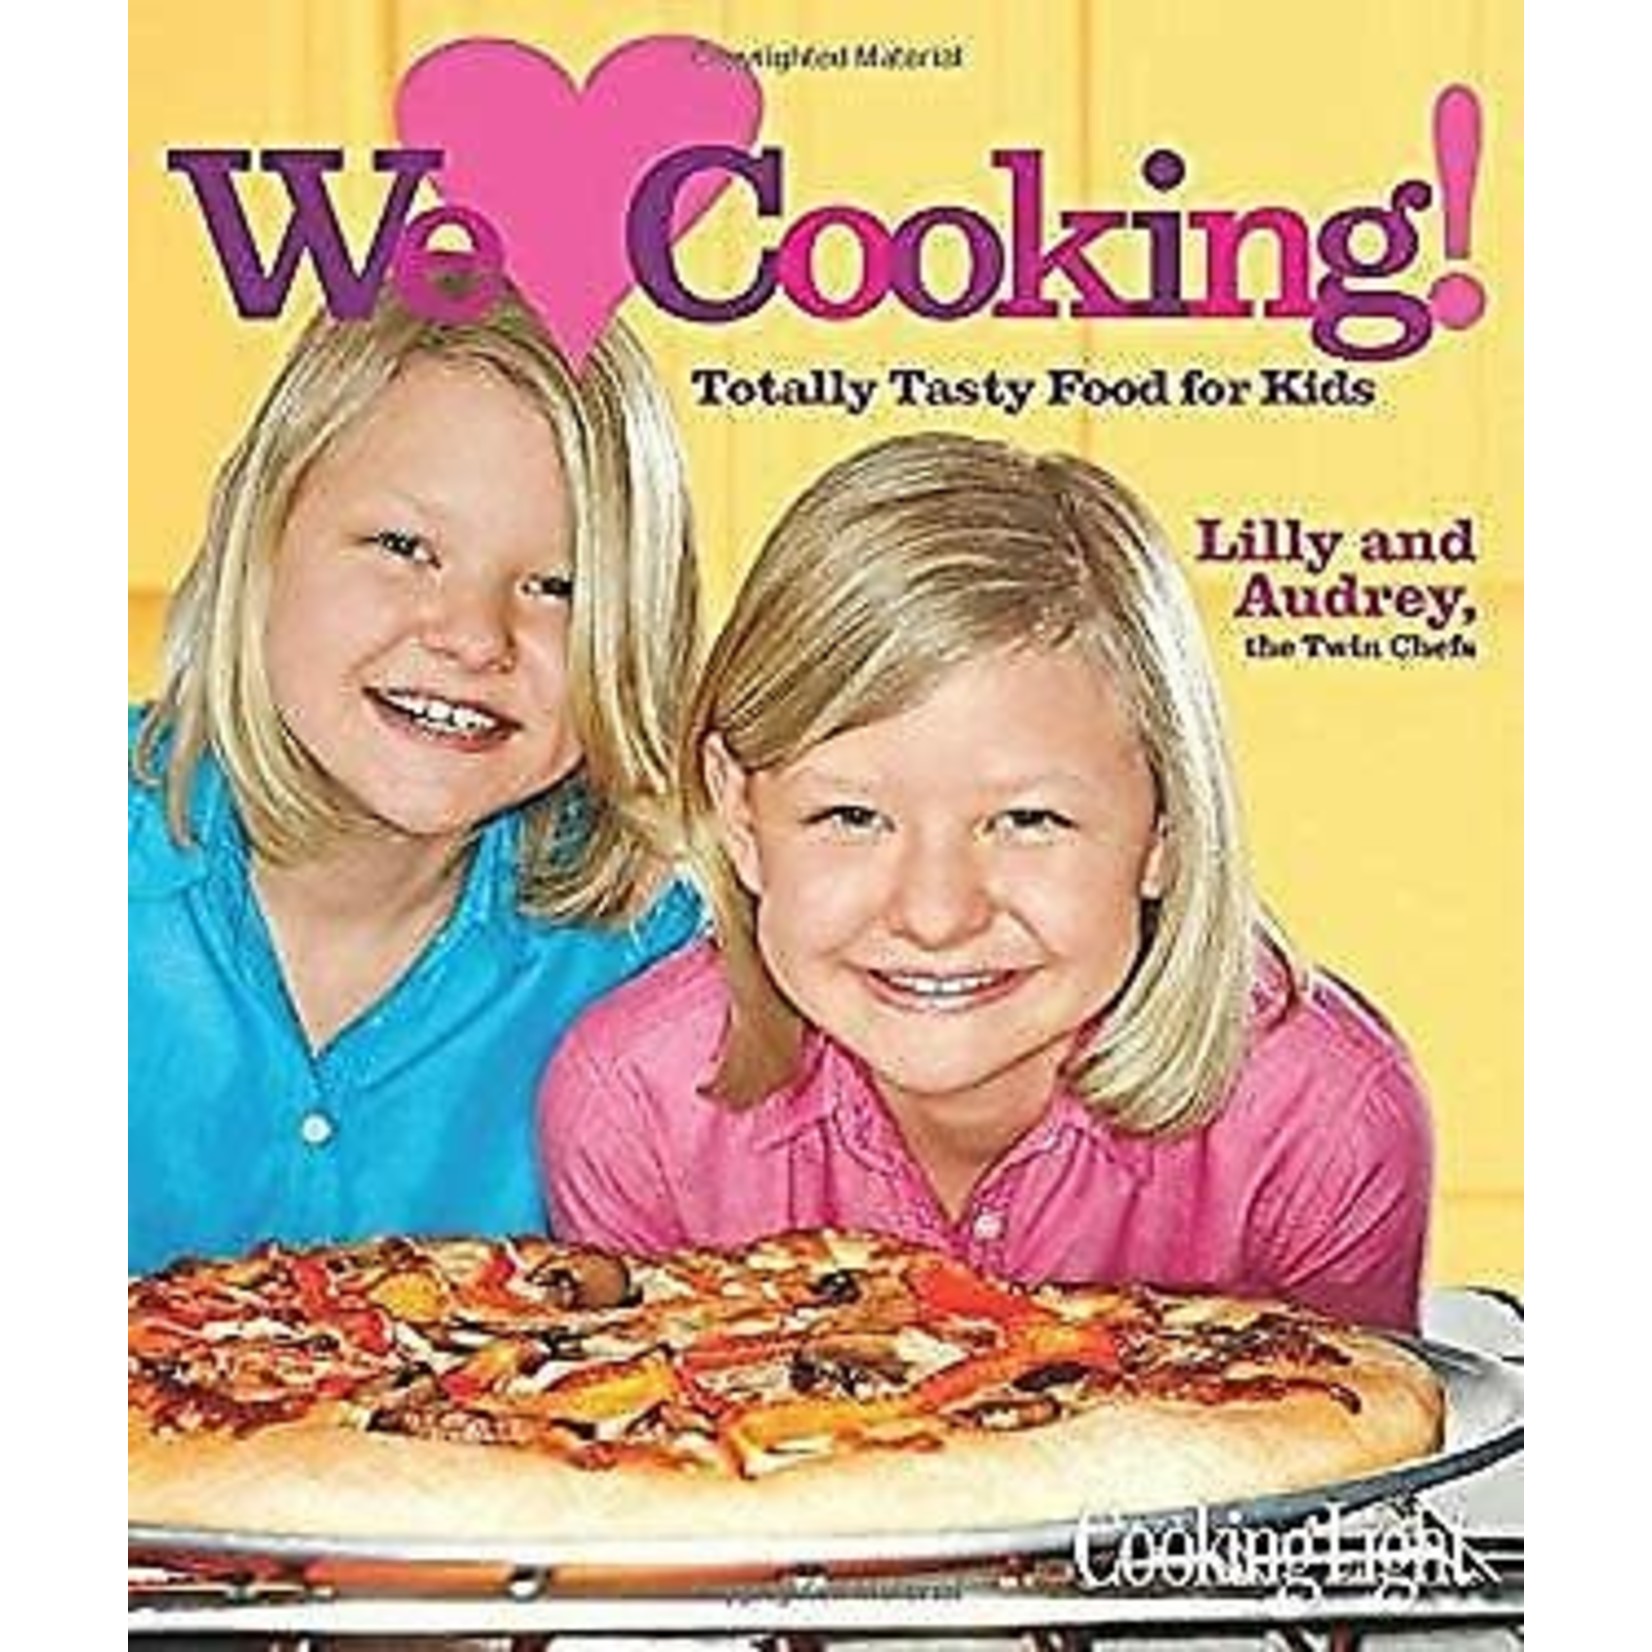 We Cooking - Totally Tasty Food for Kids